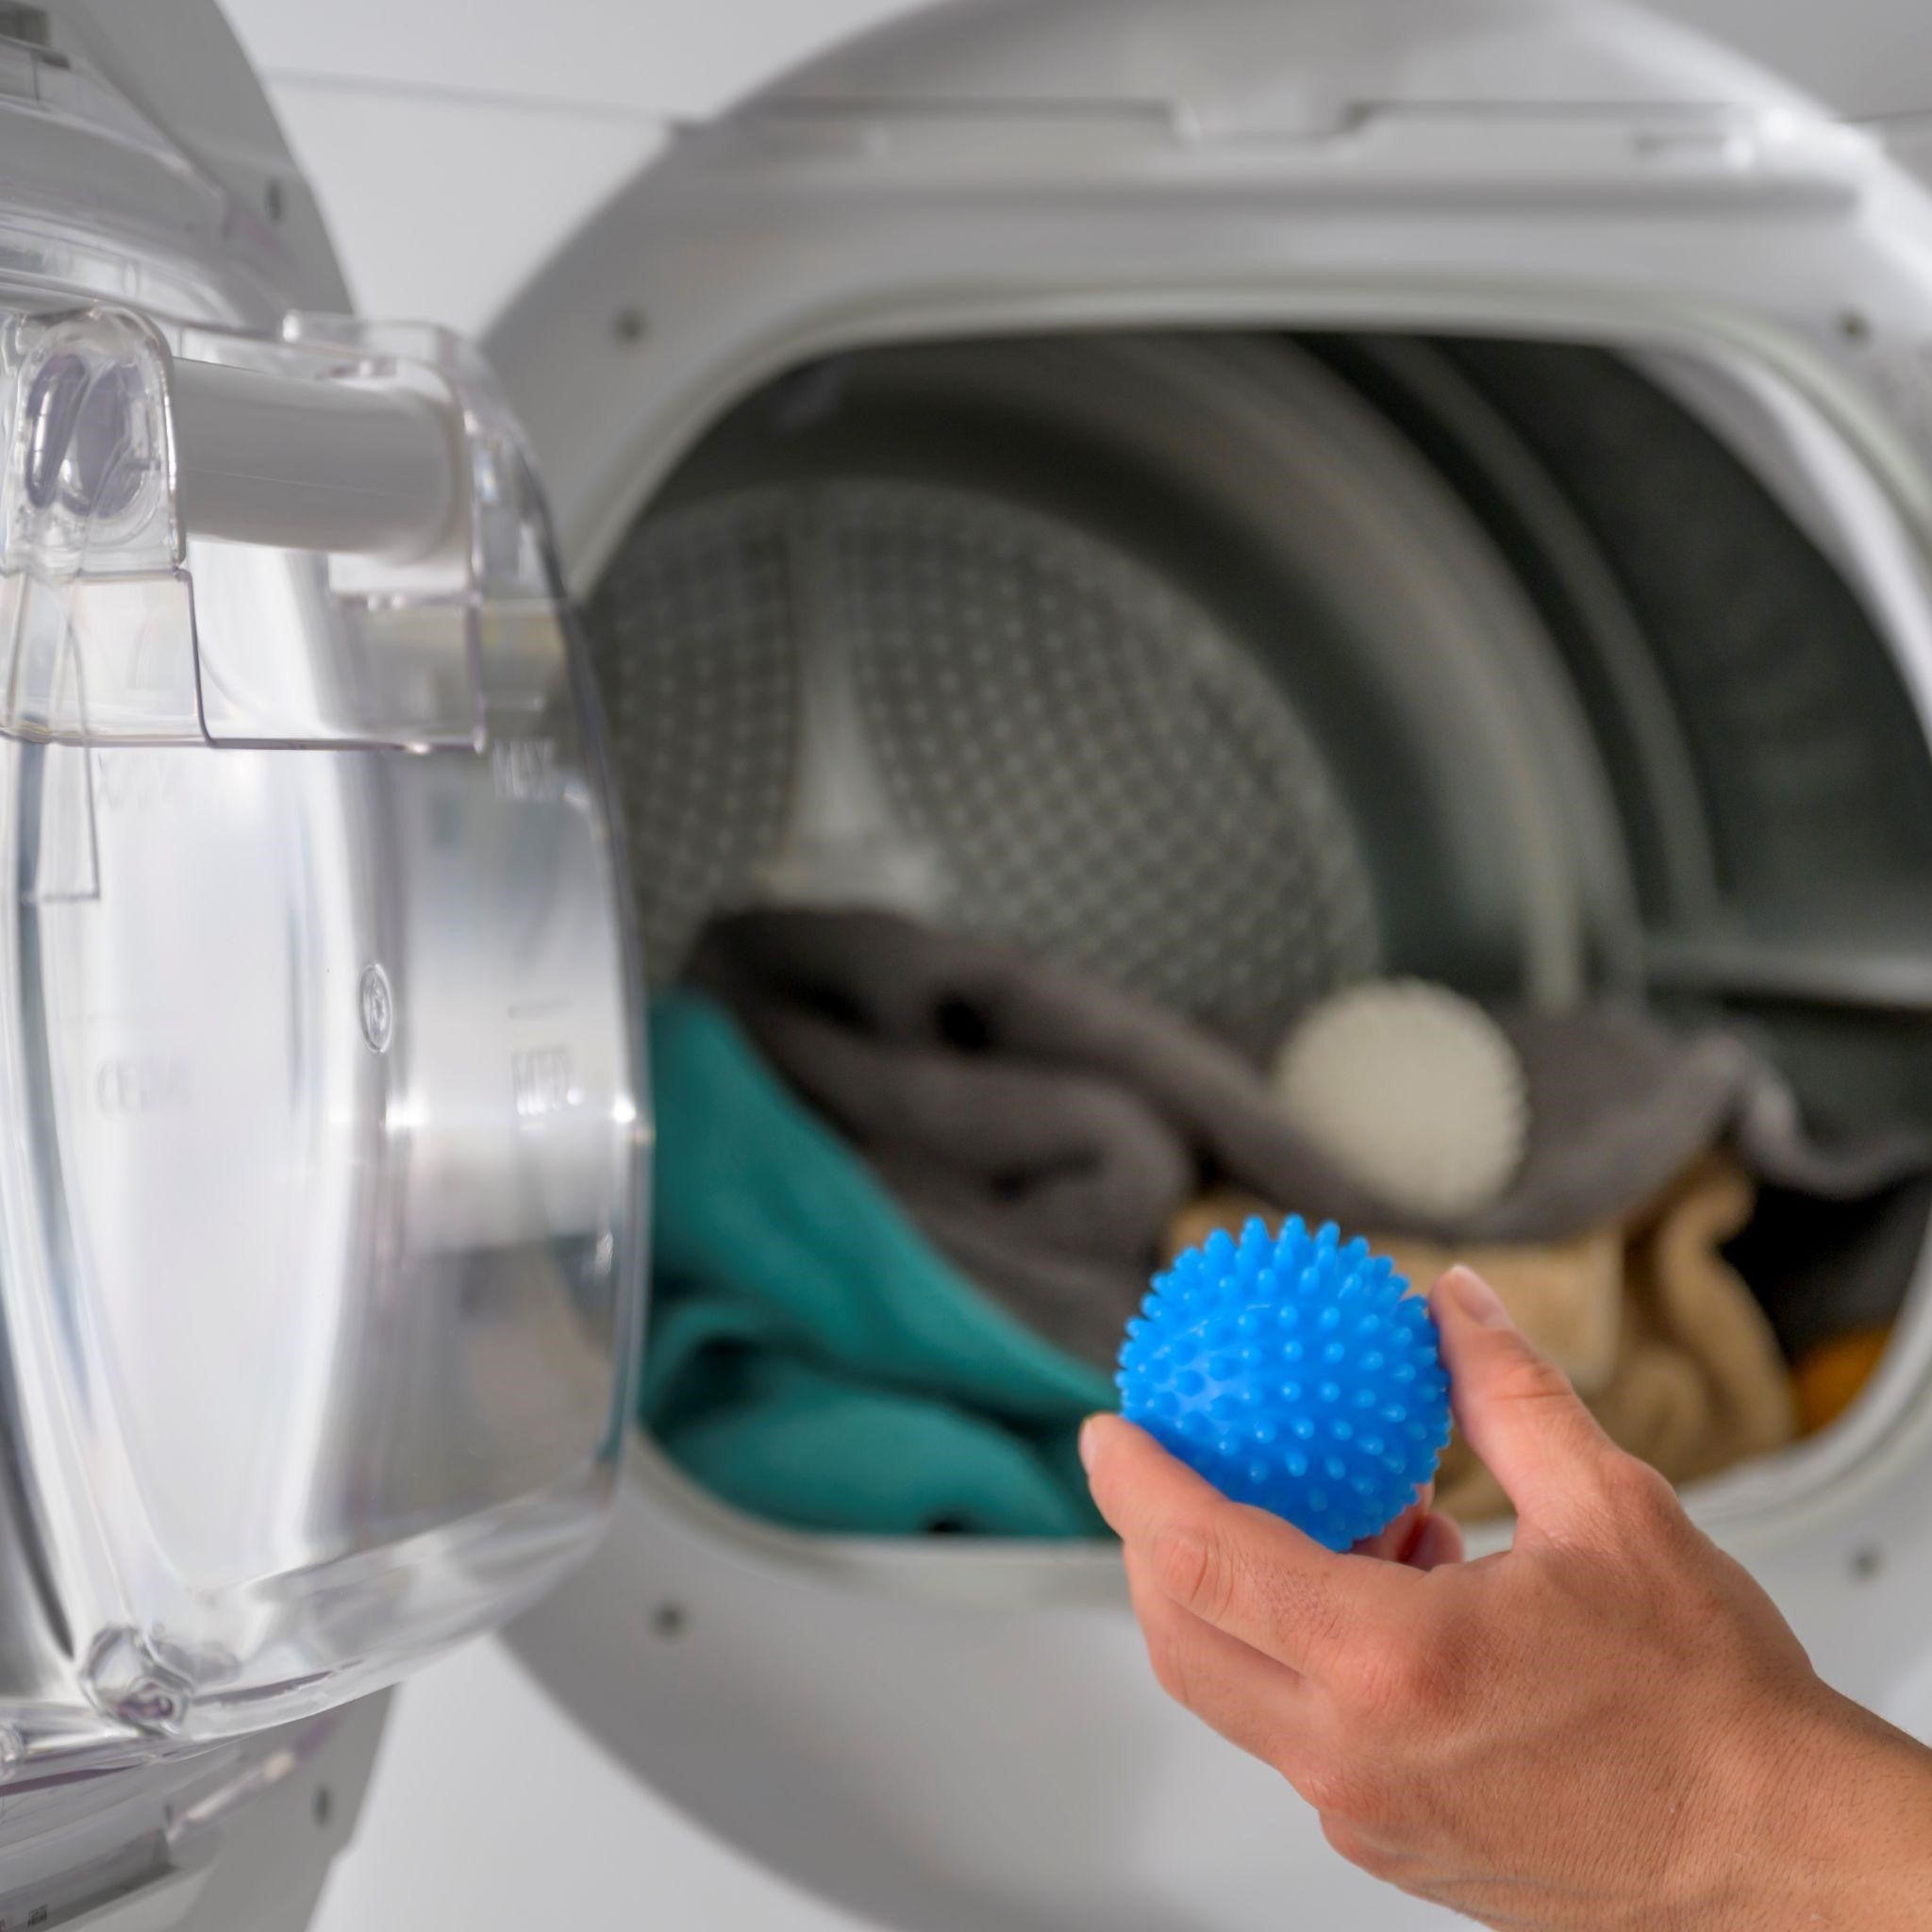 How to Use Dryer Balls: A Step-by-Step Guide